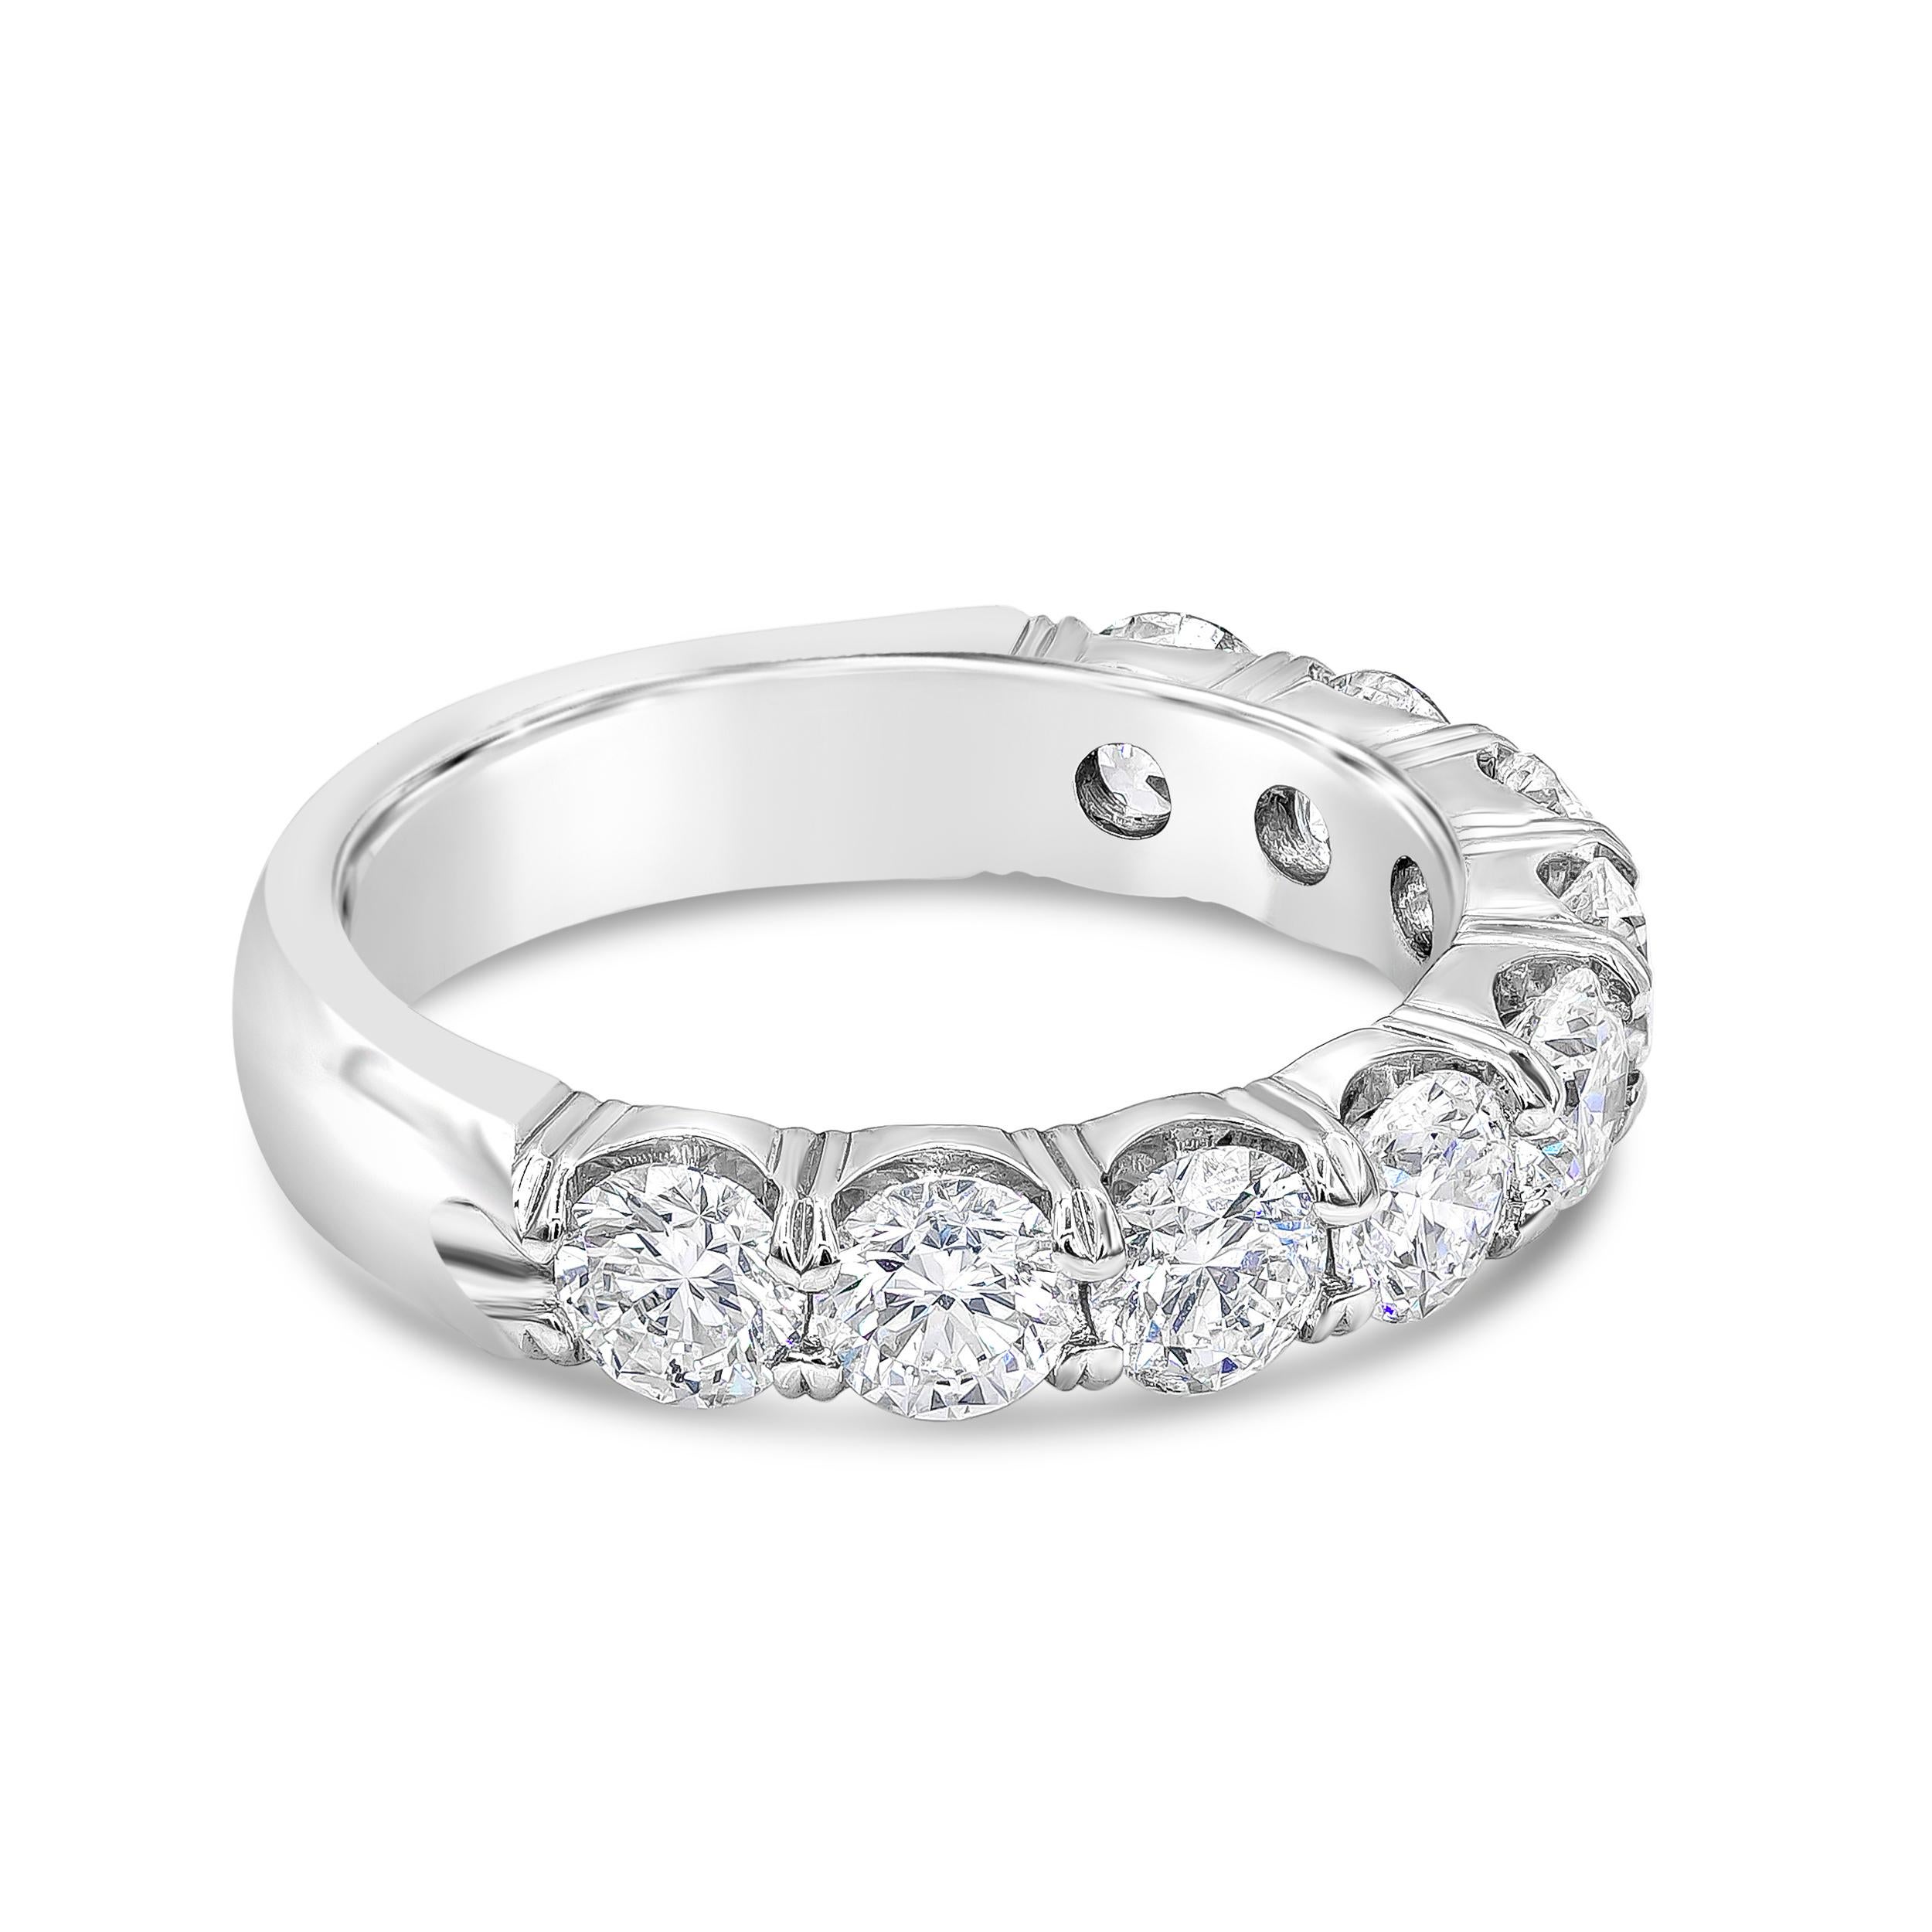 Showcasing nine round brilliant diamonds, elegantly set in a scalloped pave setting made in platinum. Diamonds weigh 2.13 carats total.

Style available in different price ranges. Prices are based on your selection of the 4C’s (Carat, Color,